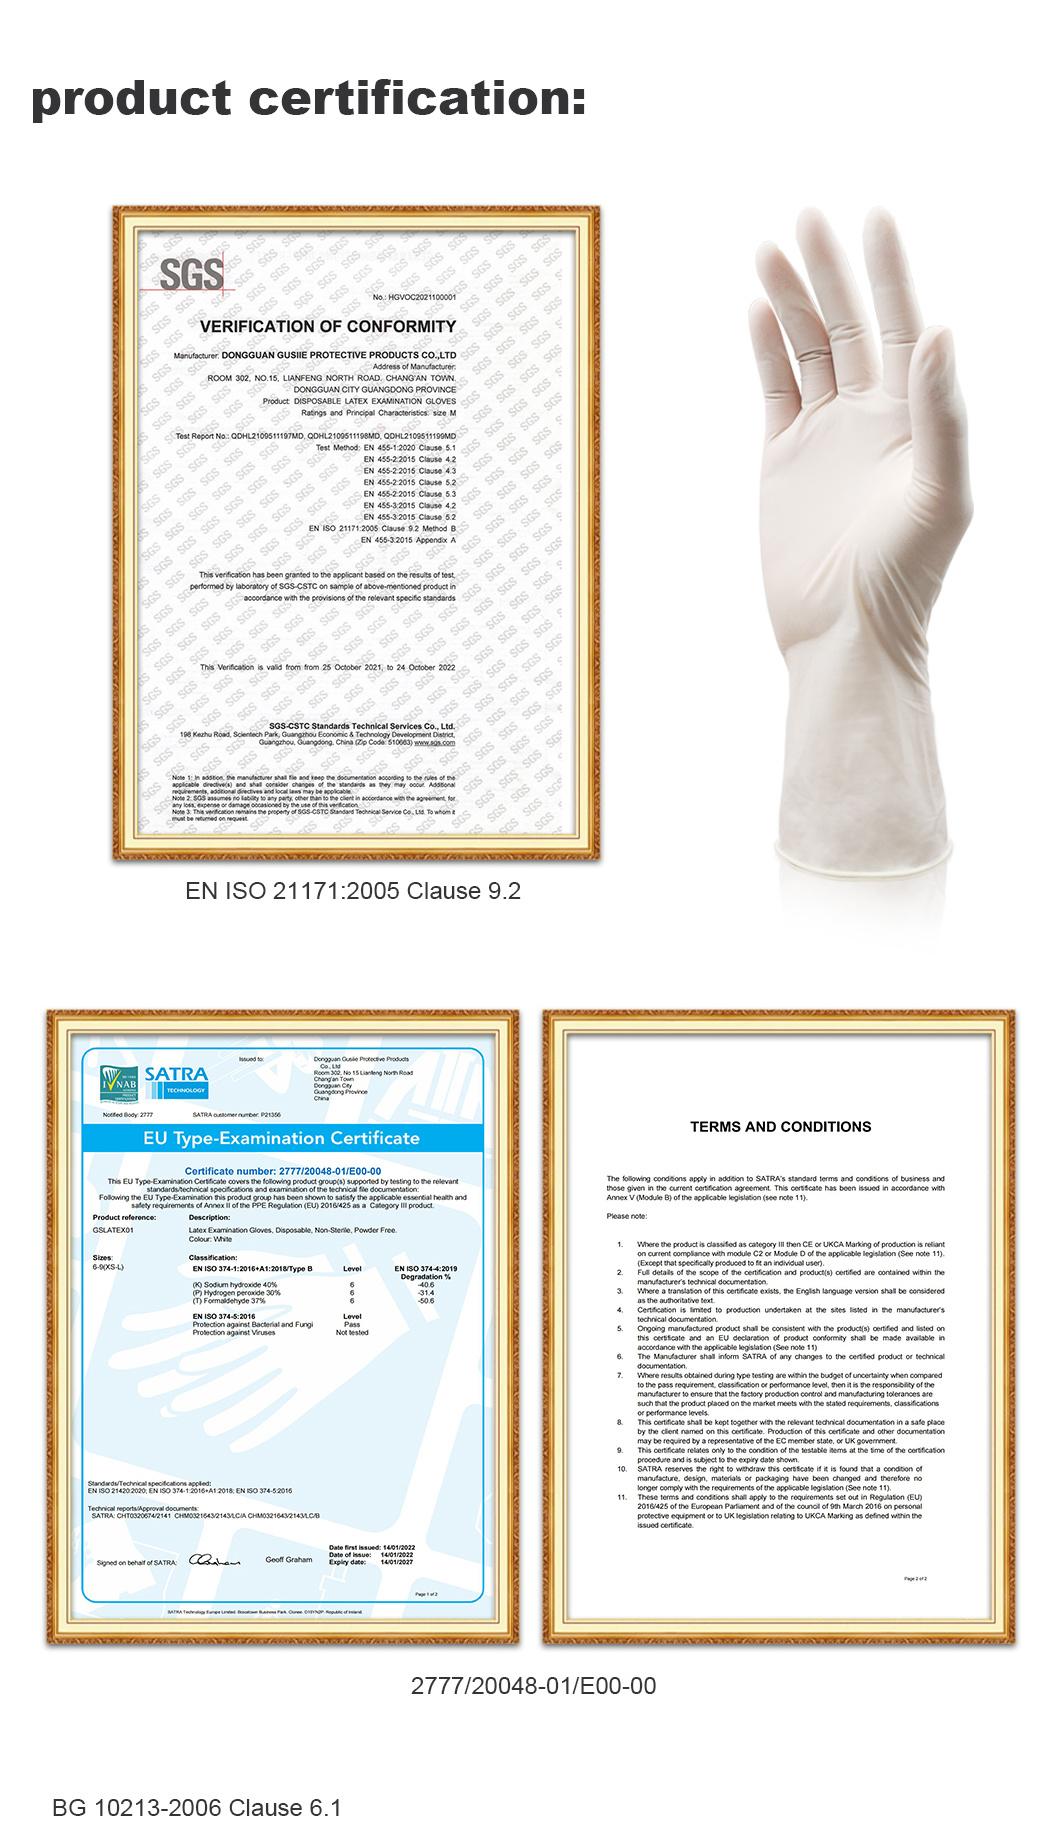 Latex Gloves, Safety Wear Latex Work Gloves Disposable Medical Examination Gloves